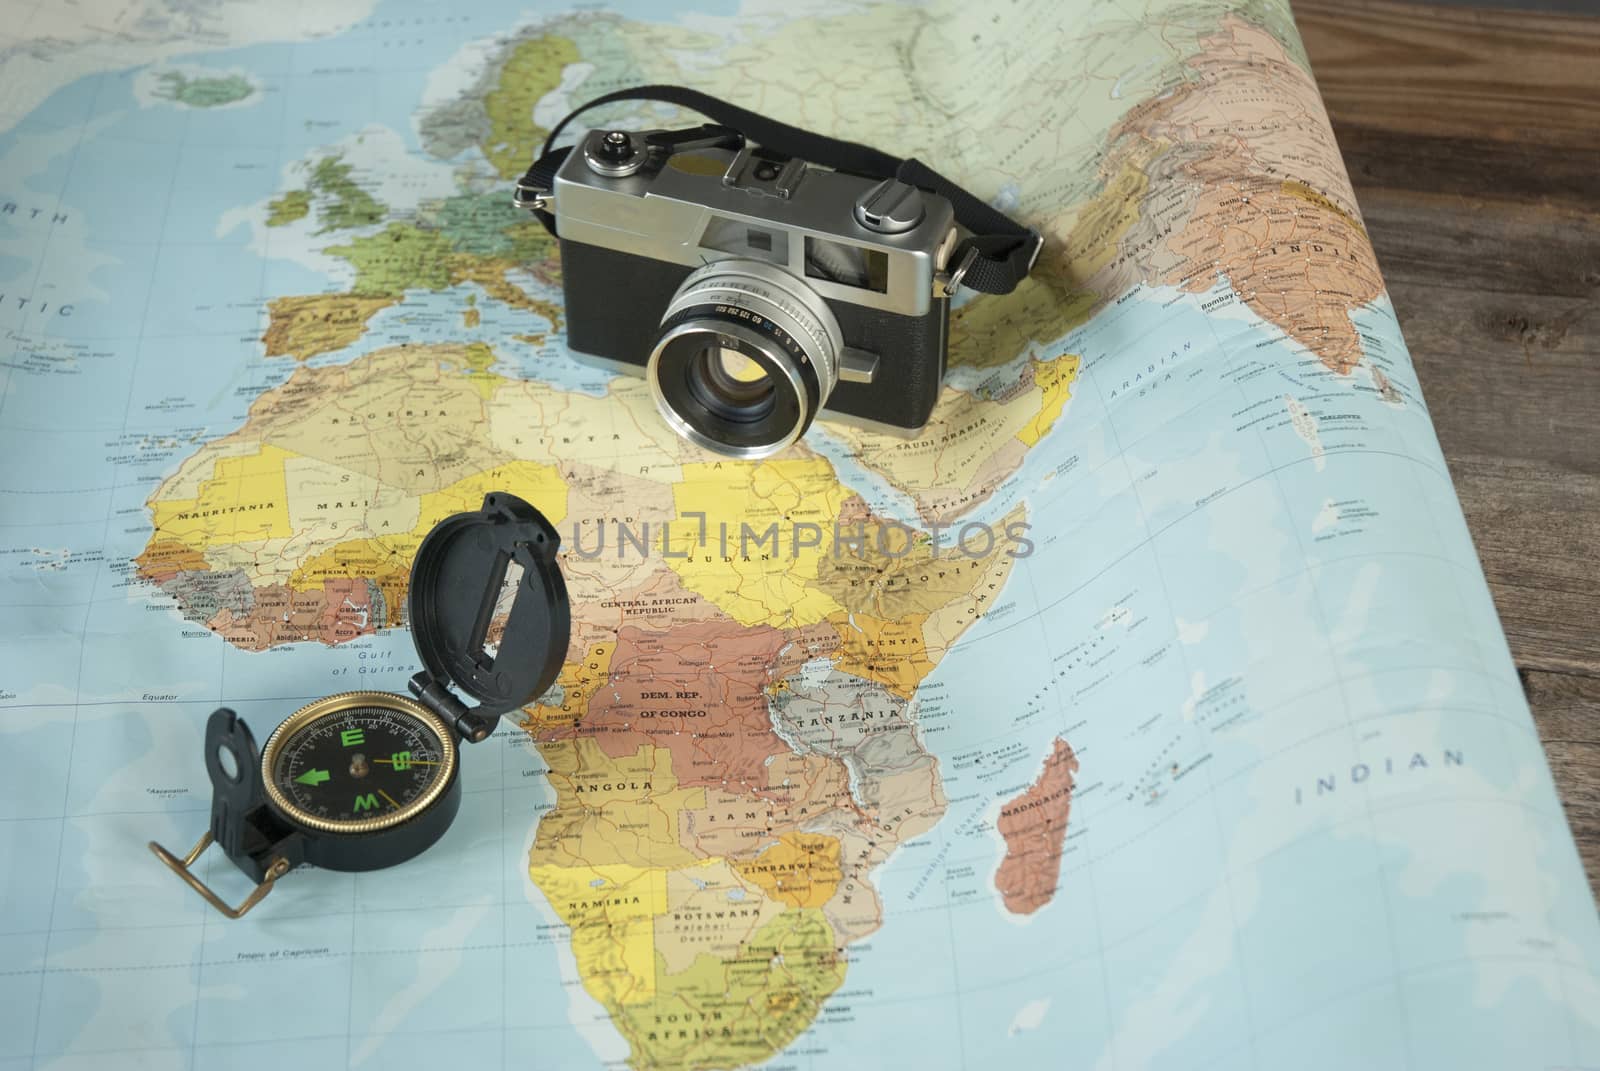 This image shows a world map, a compass and a camera for world travelers